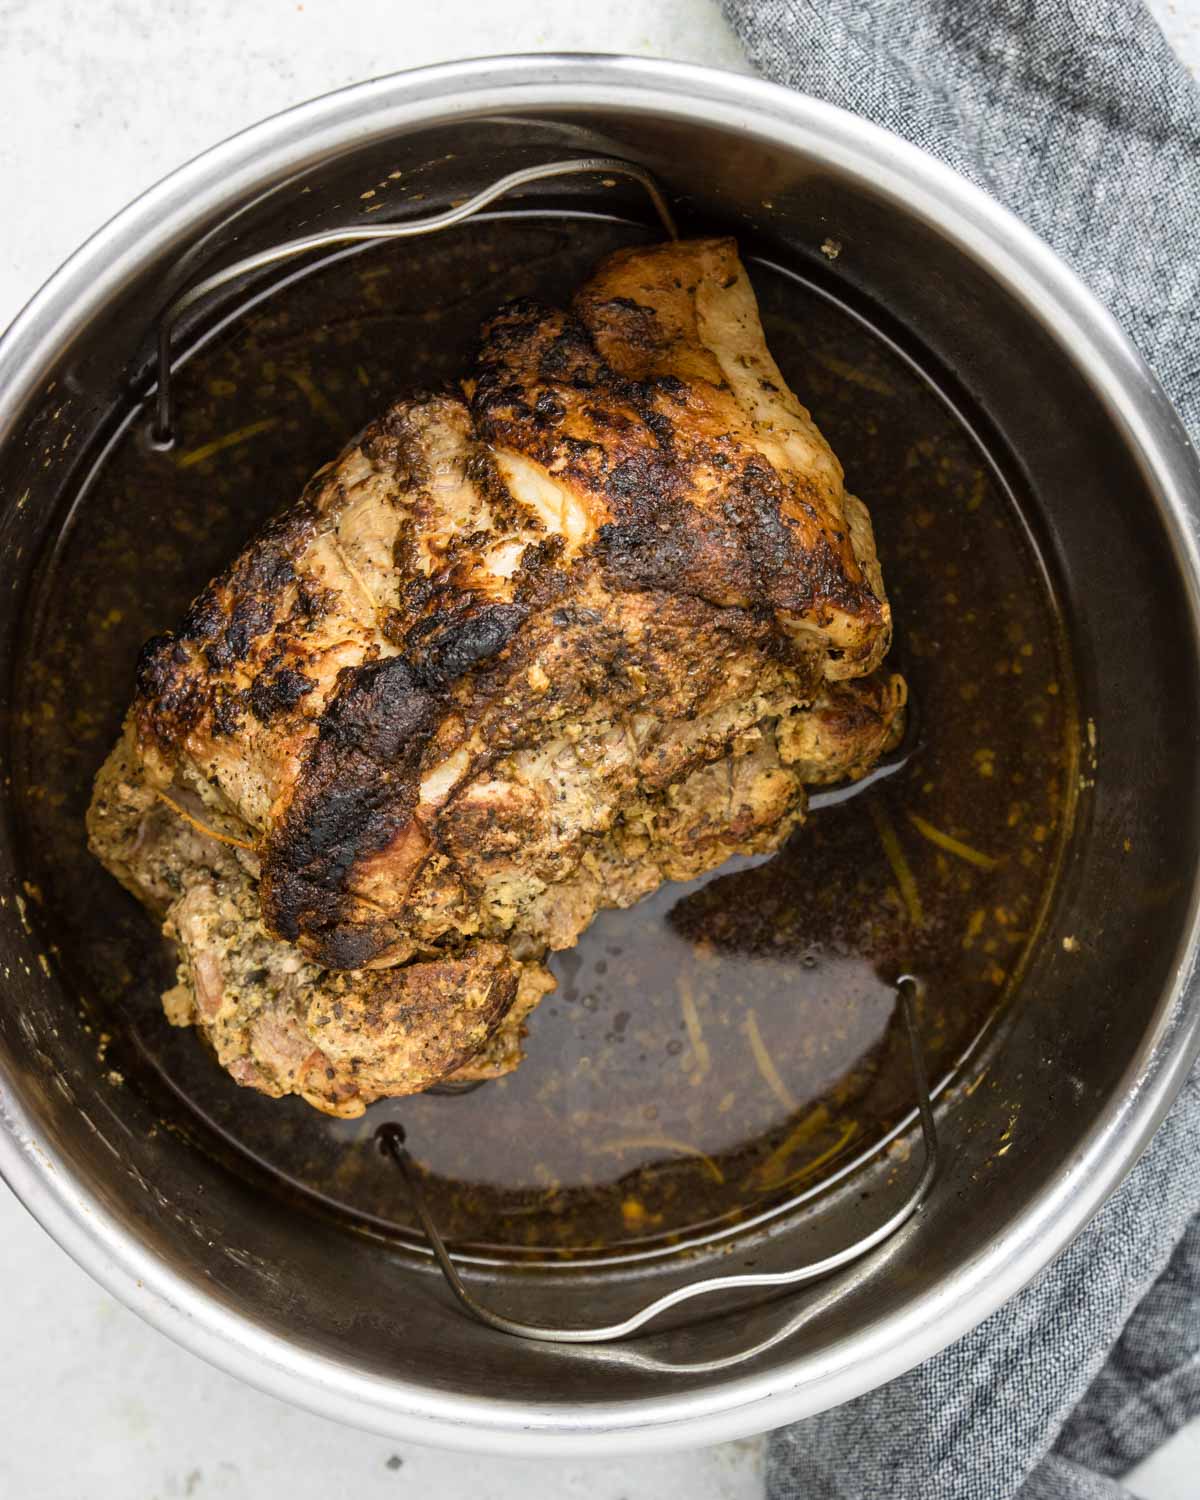 How Long To Cook A Pork Roast In An Electric Pressure Cooker